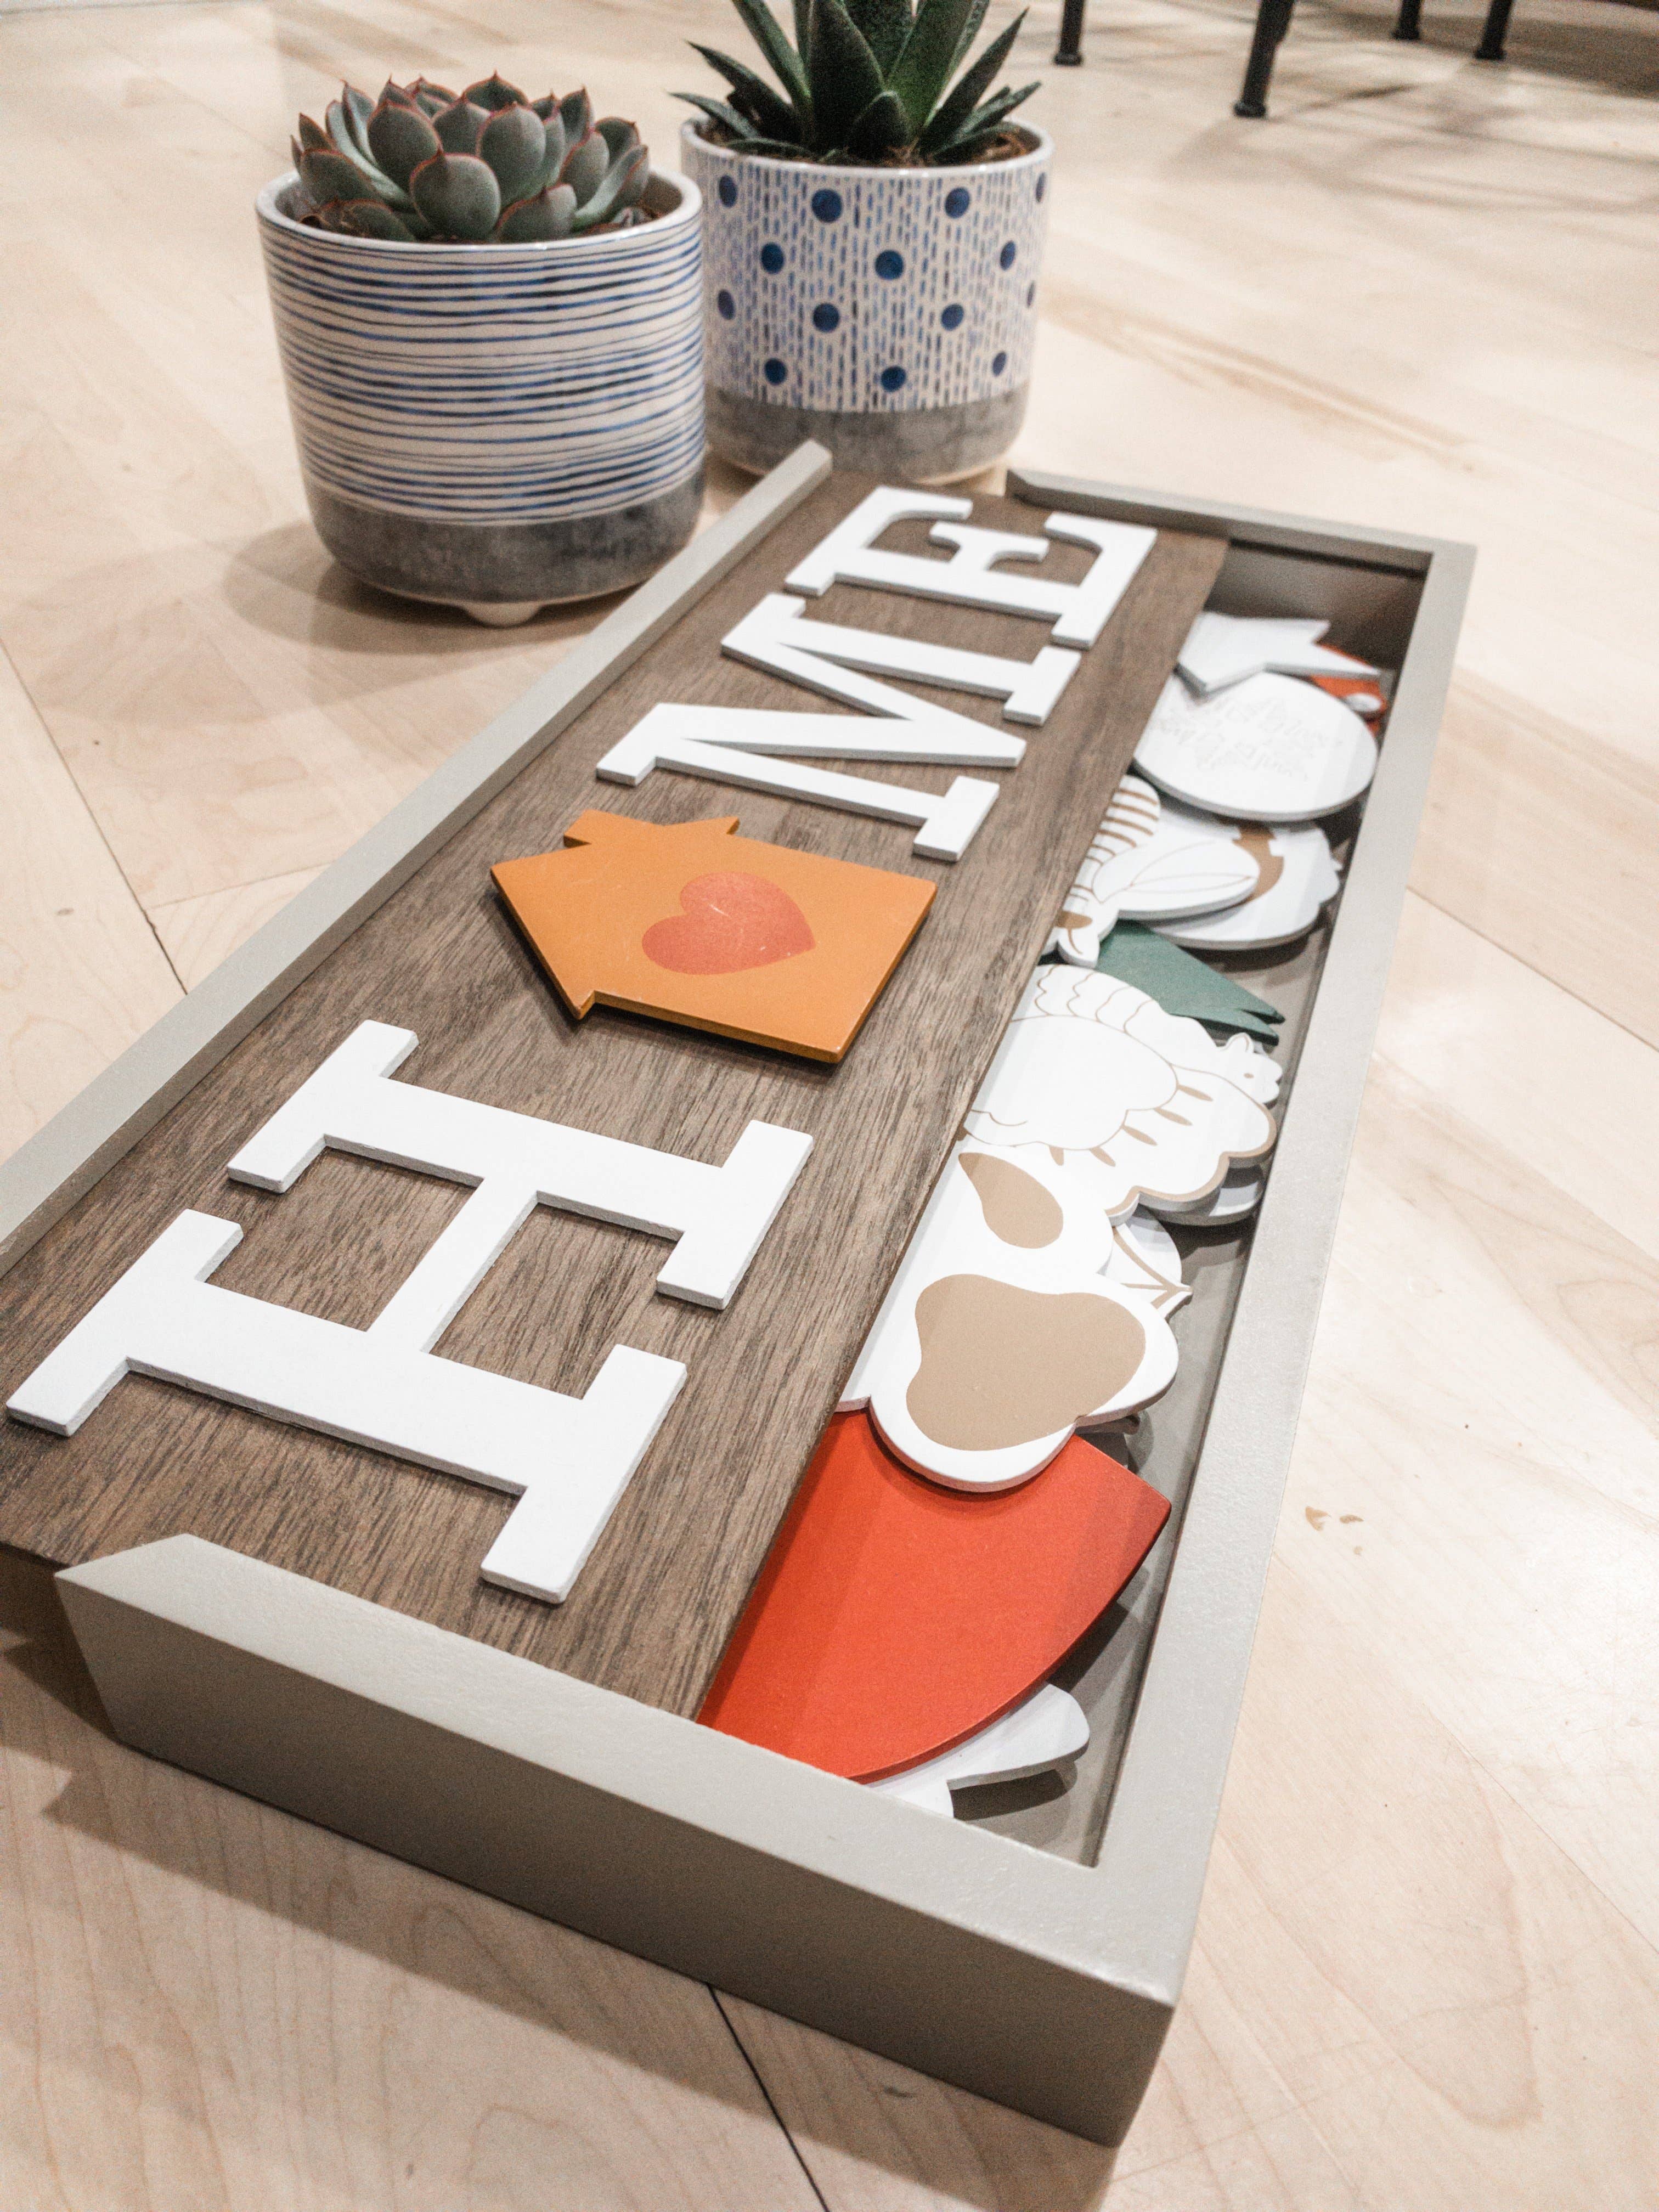 DIY Interchangeable Home Sign with Built-In Storage Box